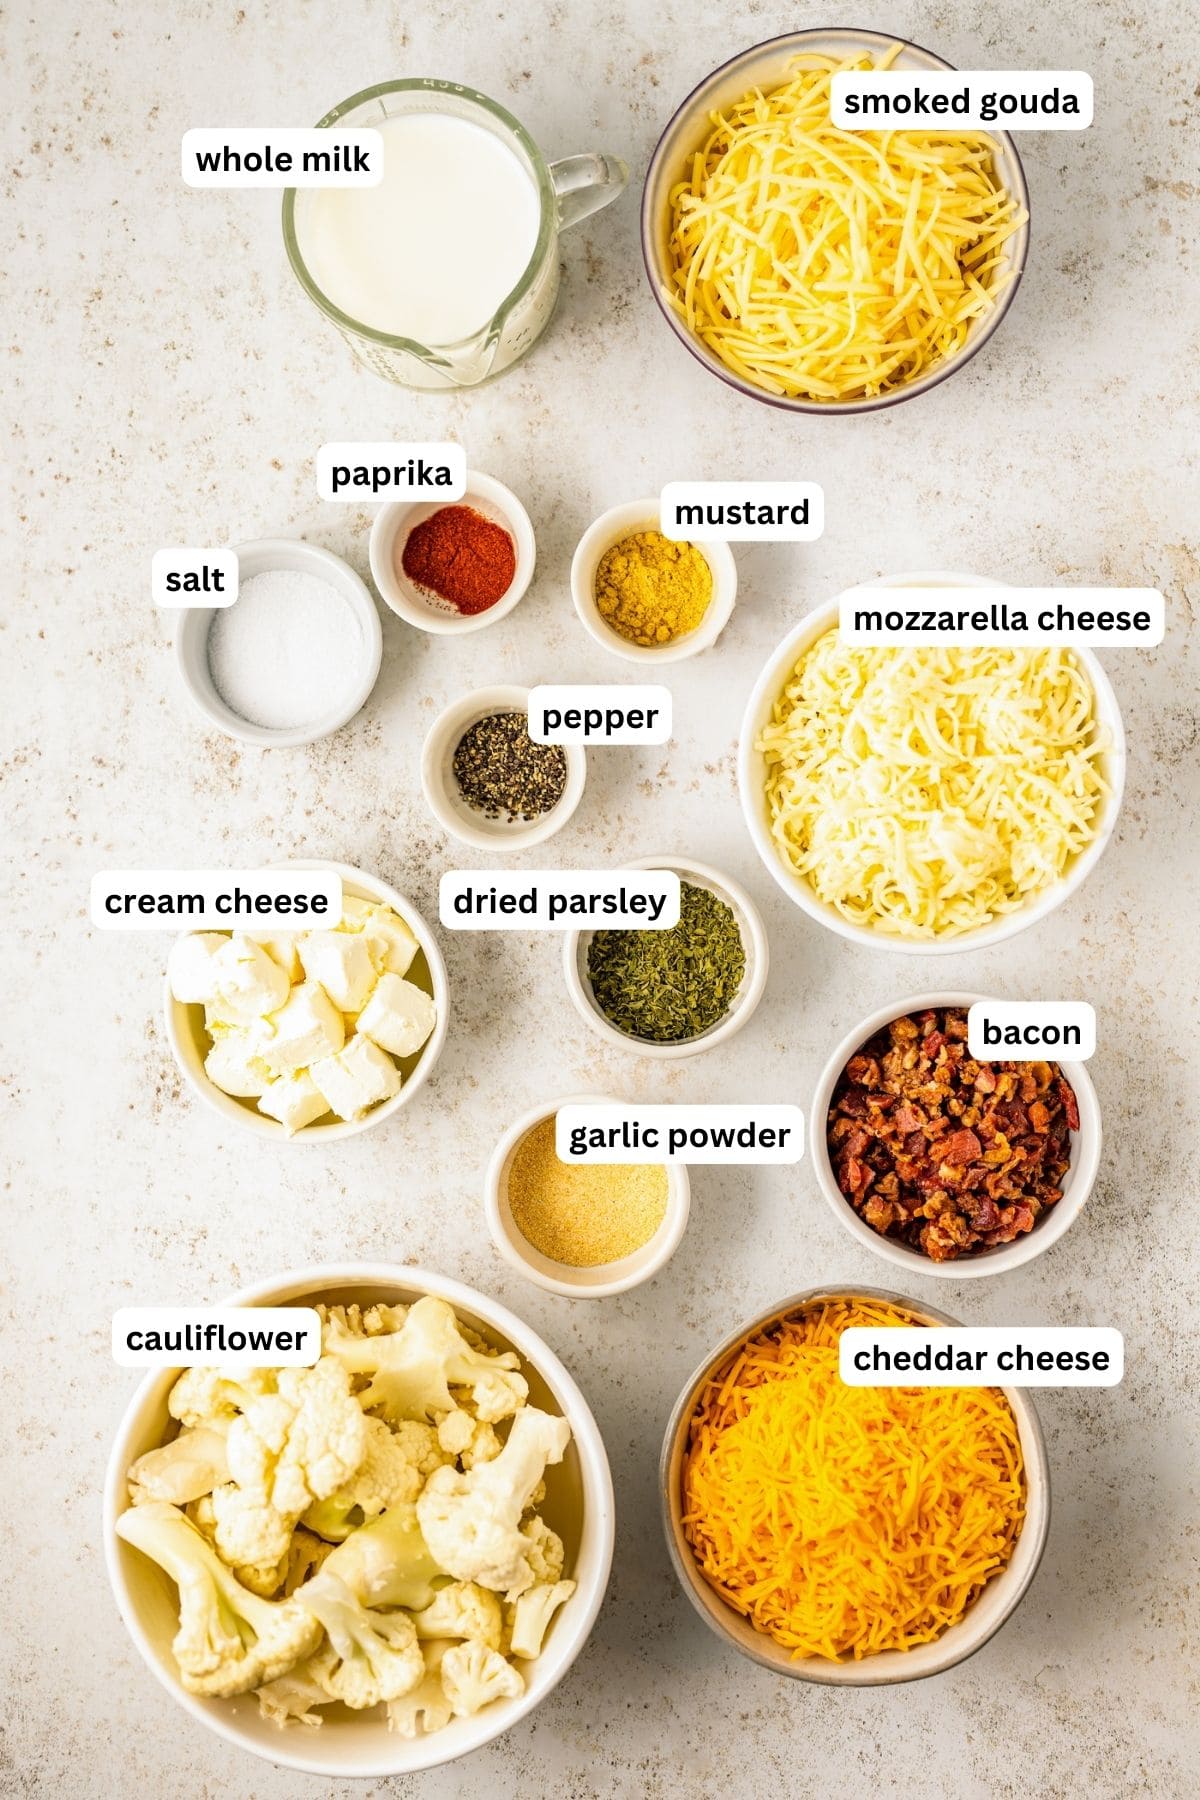 Ingredients for cauliflower Mac and cheese recipe arranged in bowls, from top to bottom: smoked gouda shredded cheese, whole milk, paprika, mustard, salt, shredded mozzarella cheese, cream cheese, dried parsley, bacon bits, garlic powder, cauliflower florets and shredded cheddar cheese.